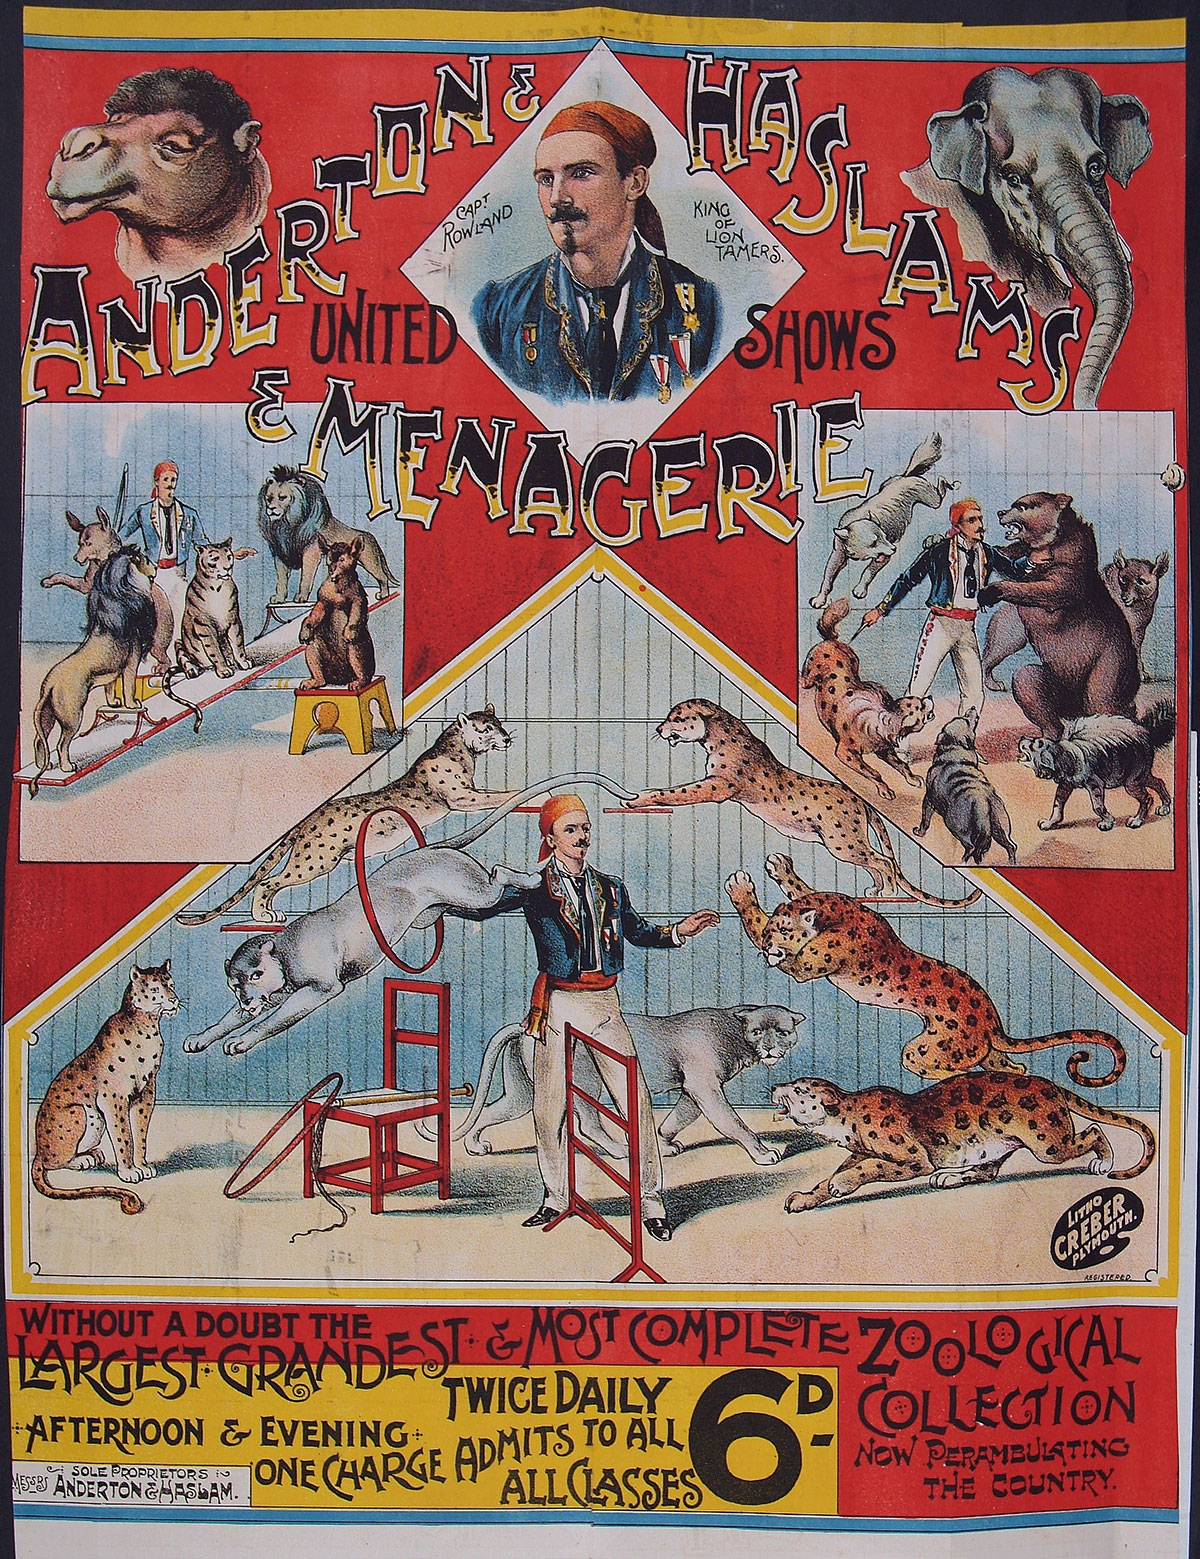 Advertisement for Anderton and Haslams United Shows and Menagerie, 1898 (COPY 1/144 f.20)